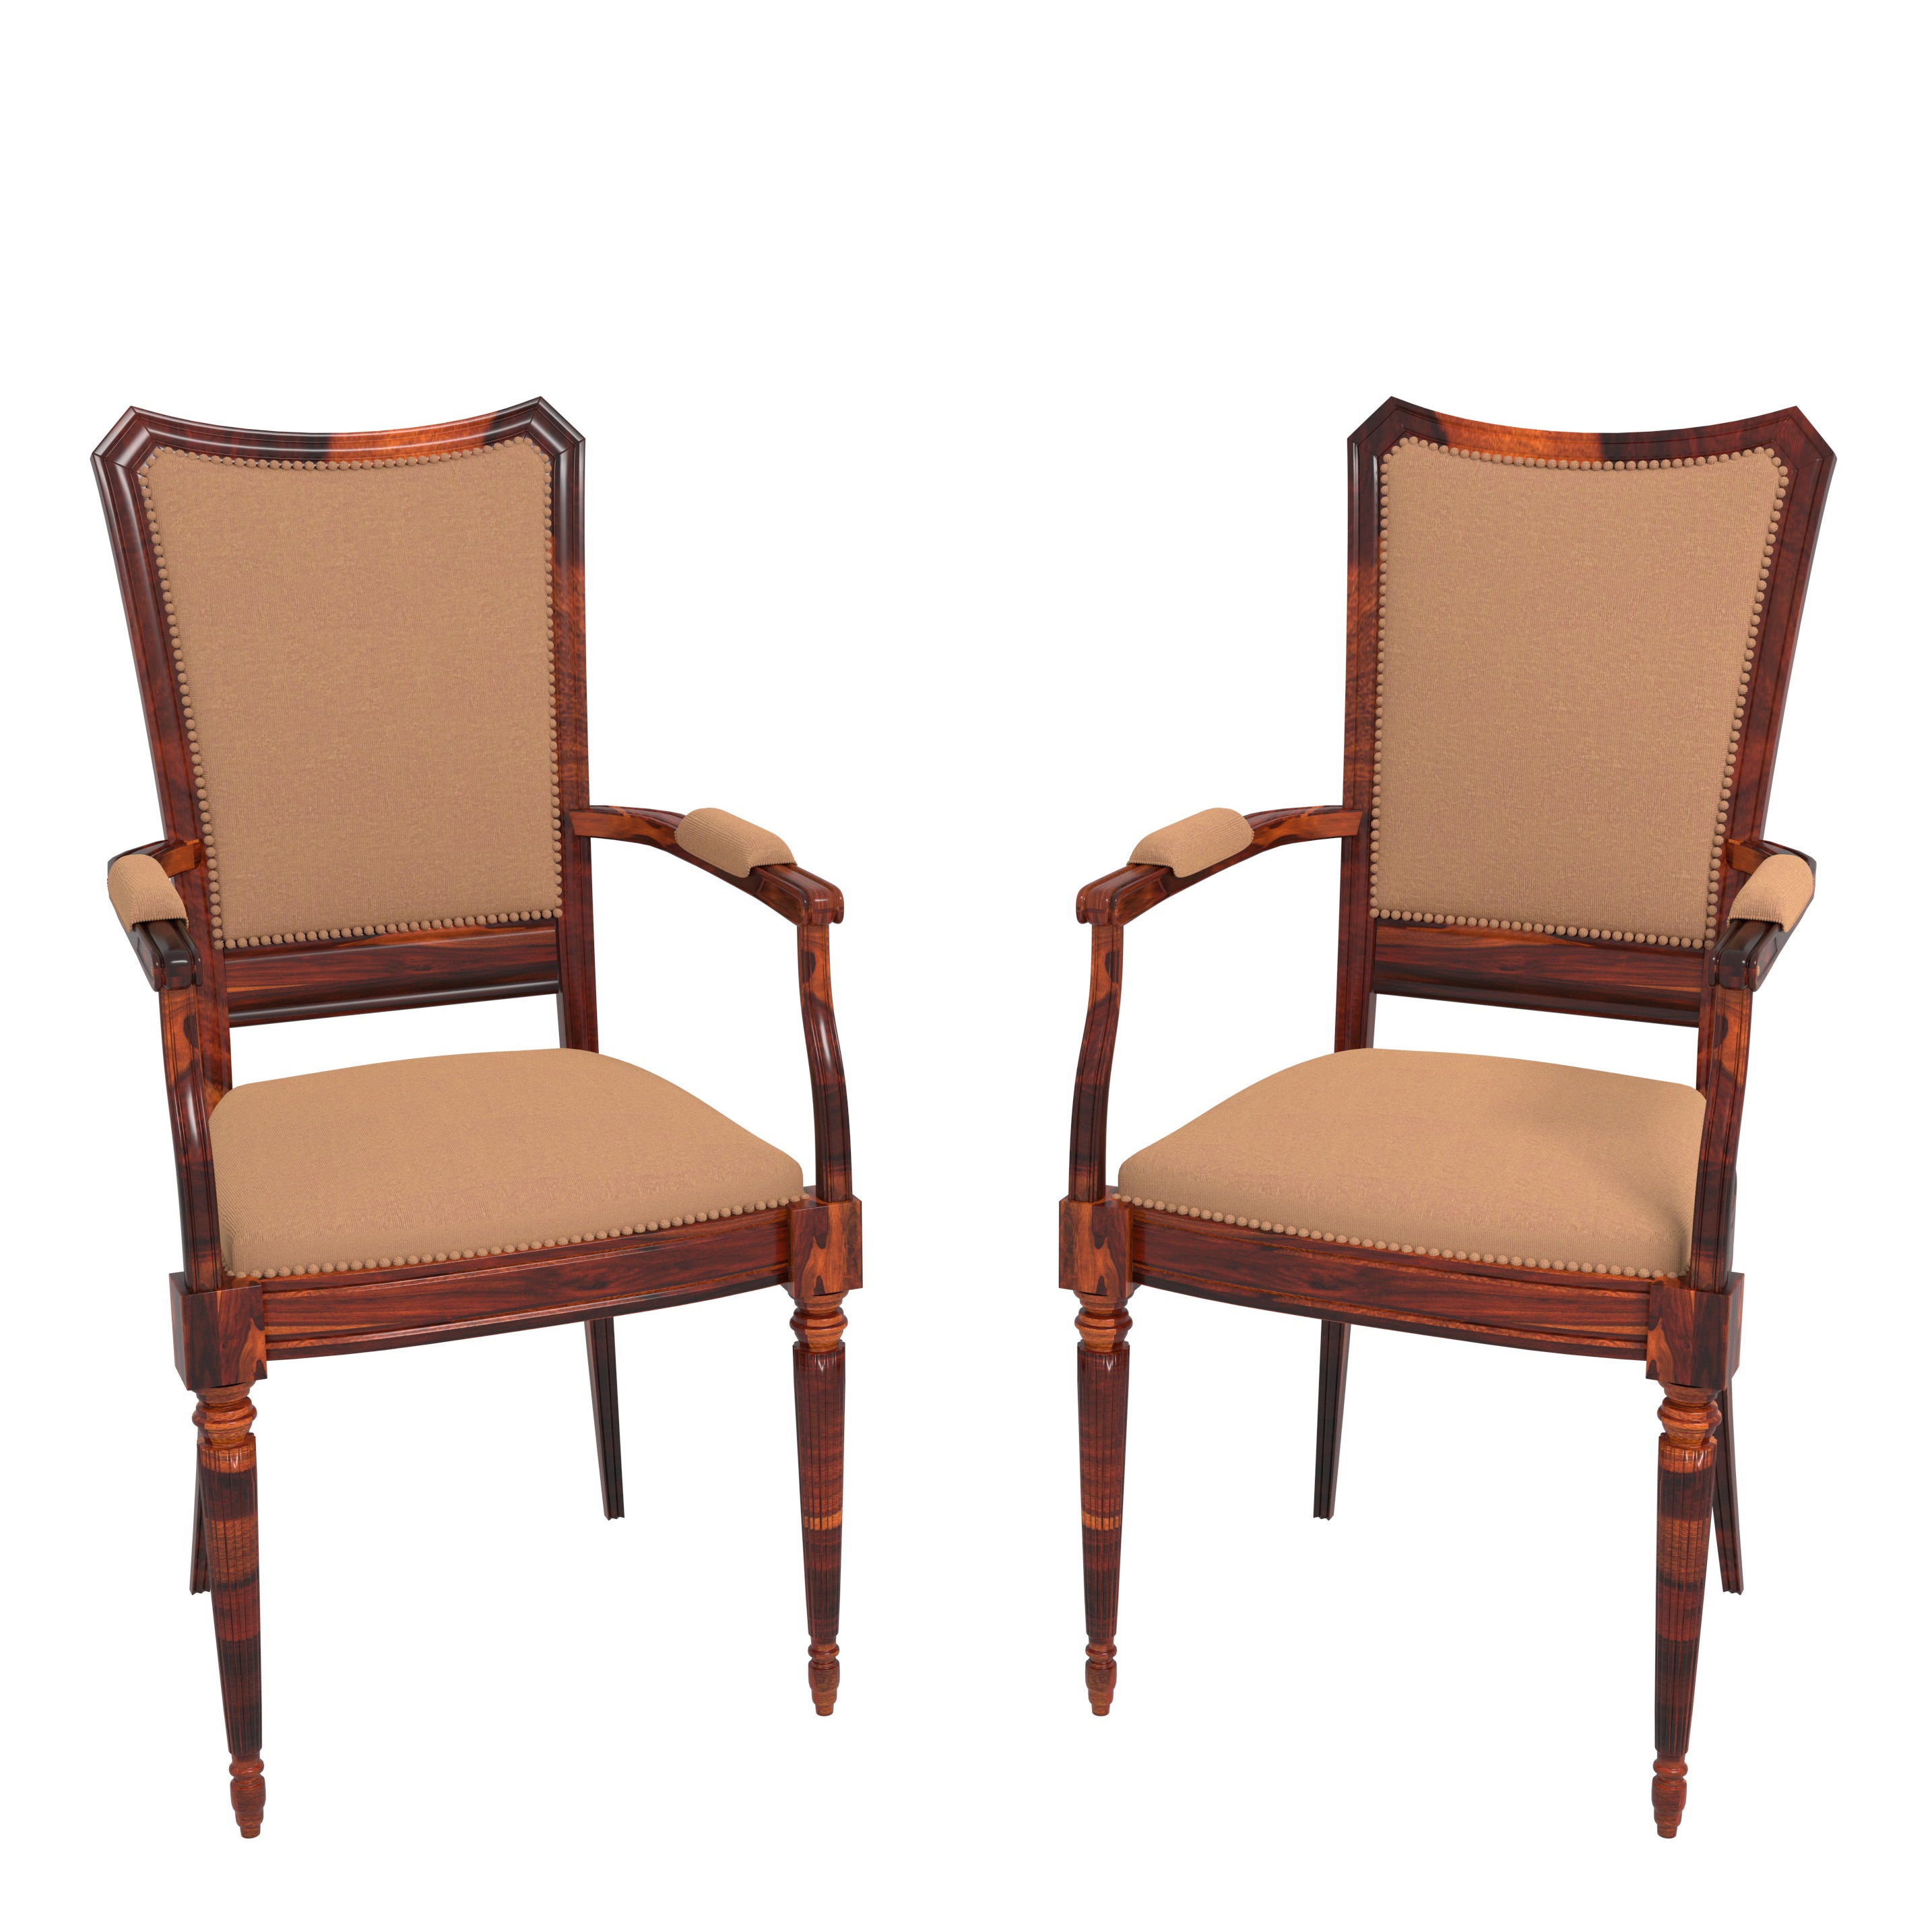 Classic Orient Style Wooden Vintage Handmade Chair Set of 2 Arm Chair